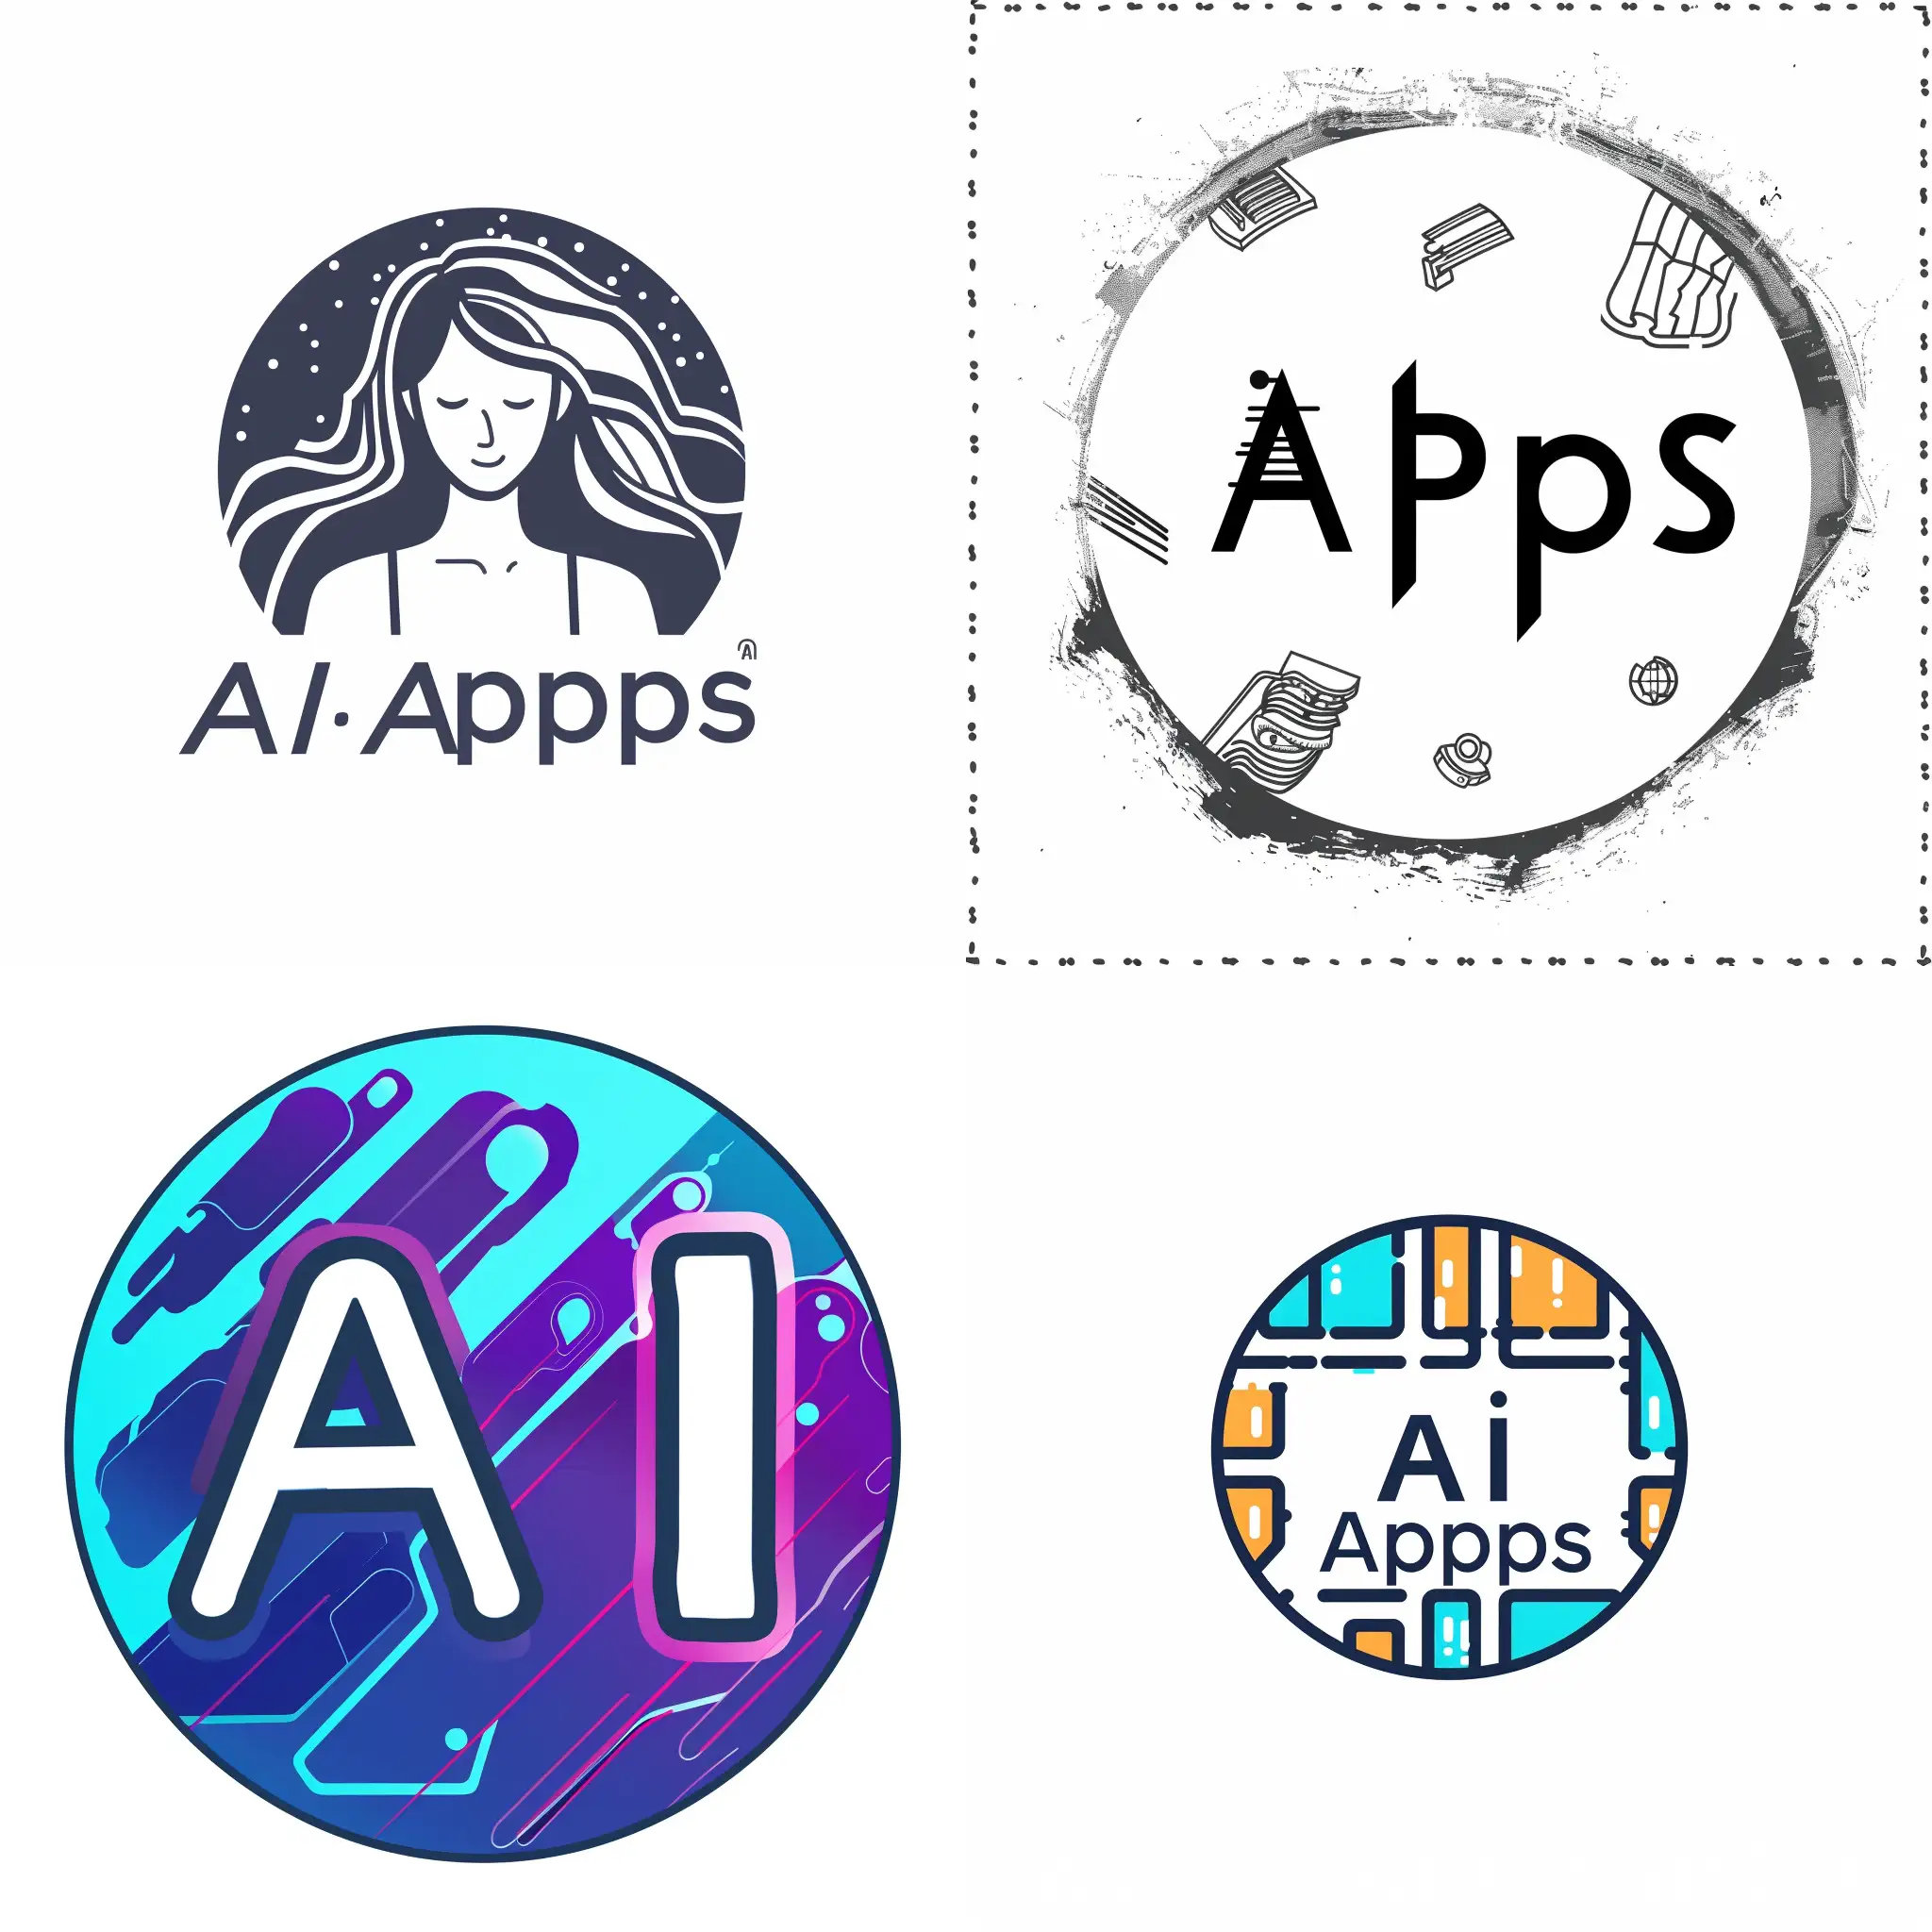 Round logo with text - "AIApps" for a programmer